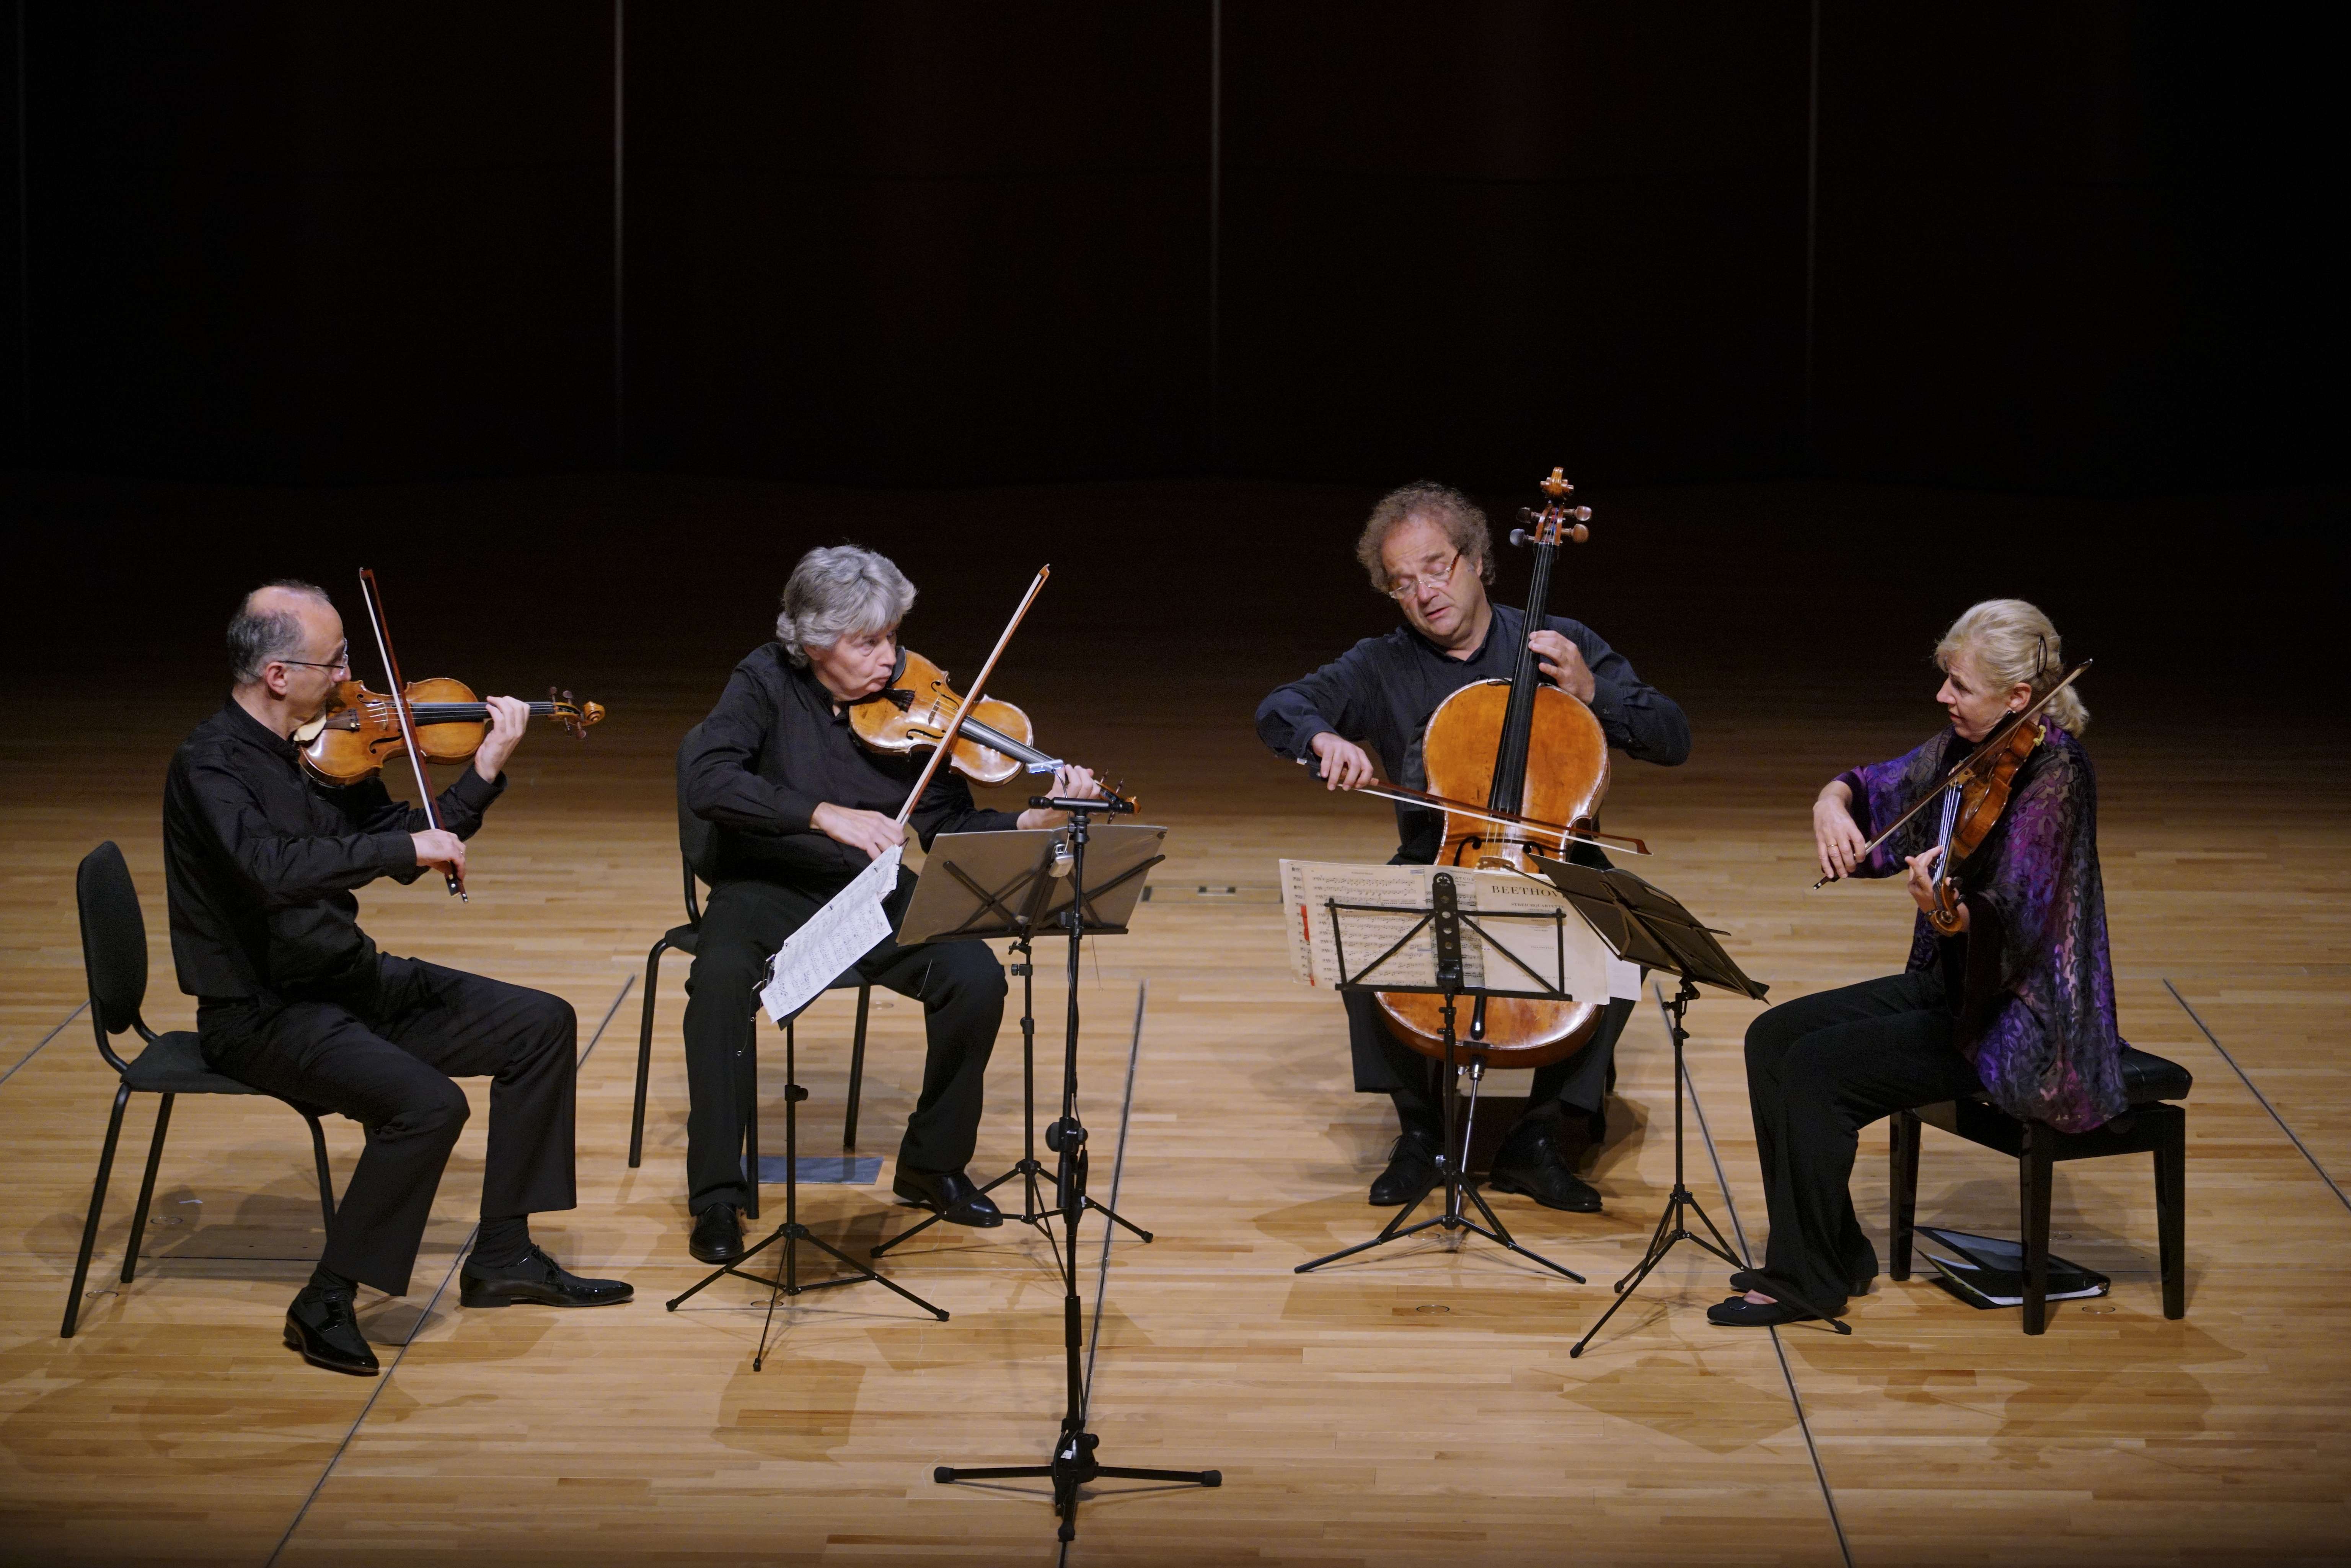 The Takács Quartet (from left) Edward Dusinberre, violin; Károly Schranz, violin; András Fejér, cello; and Geraldine Walther, viola, perform at the Grand Hall, Lee Shau Kee Lecture Centre, The University of Hong Kong.